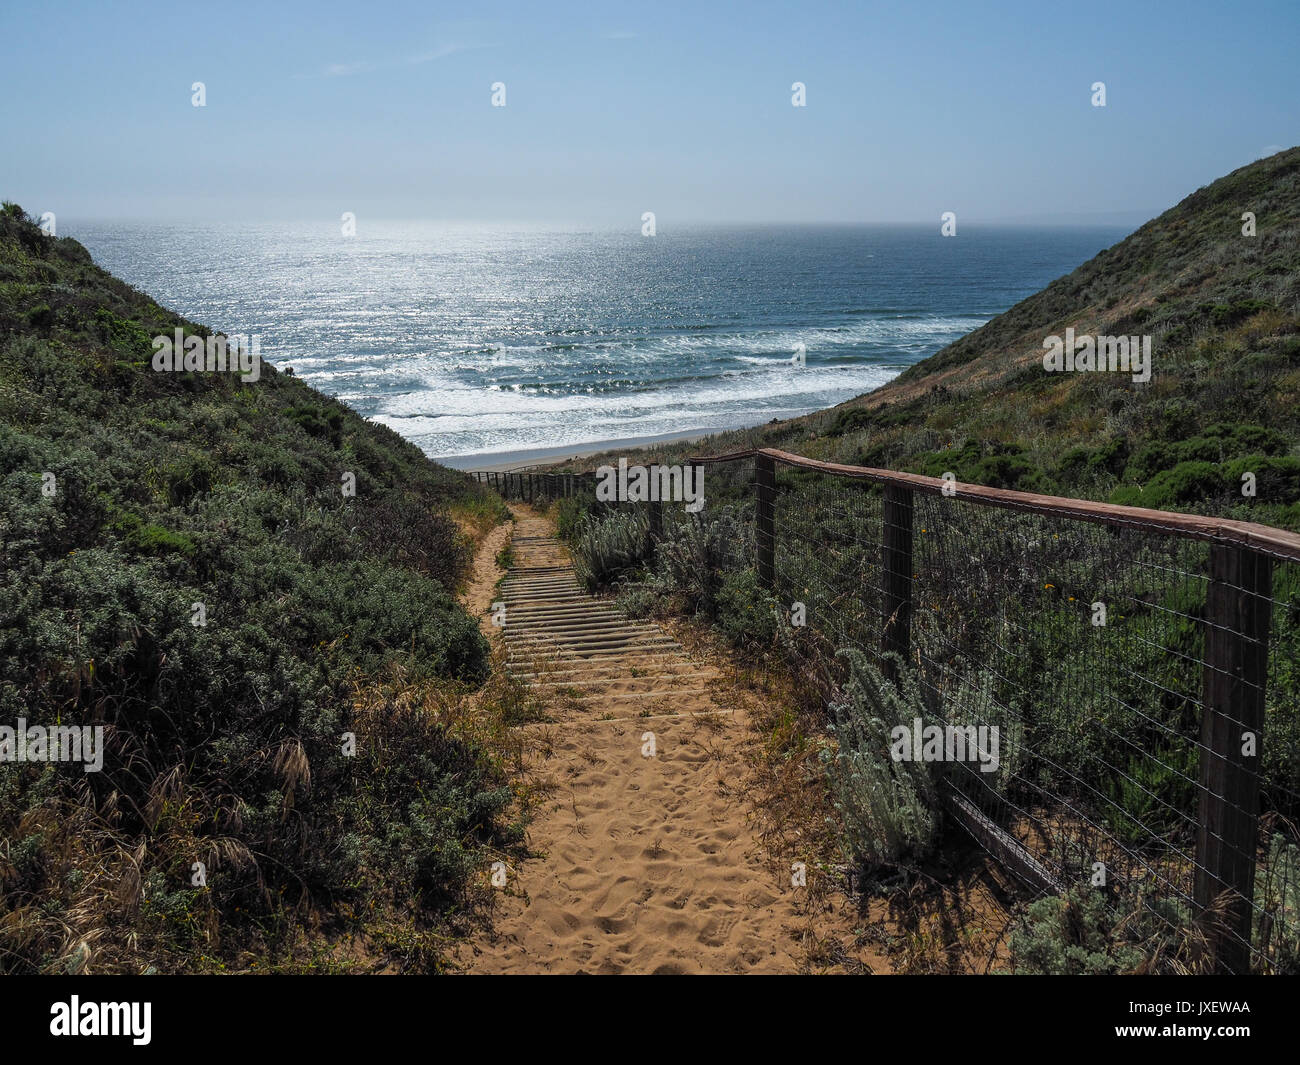 Walking through the dunes with amazing view of the ocean Stock Photo